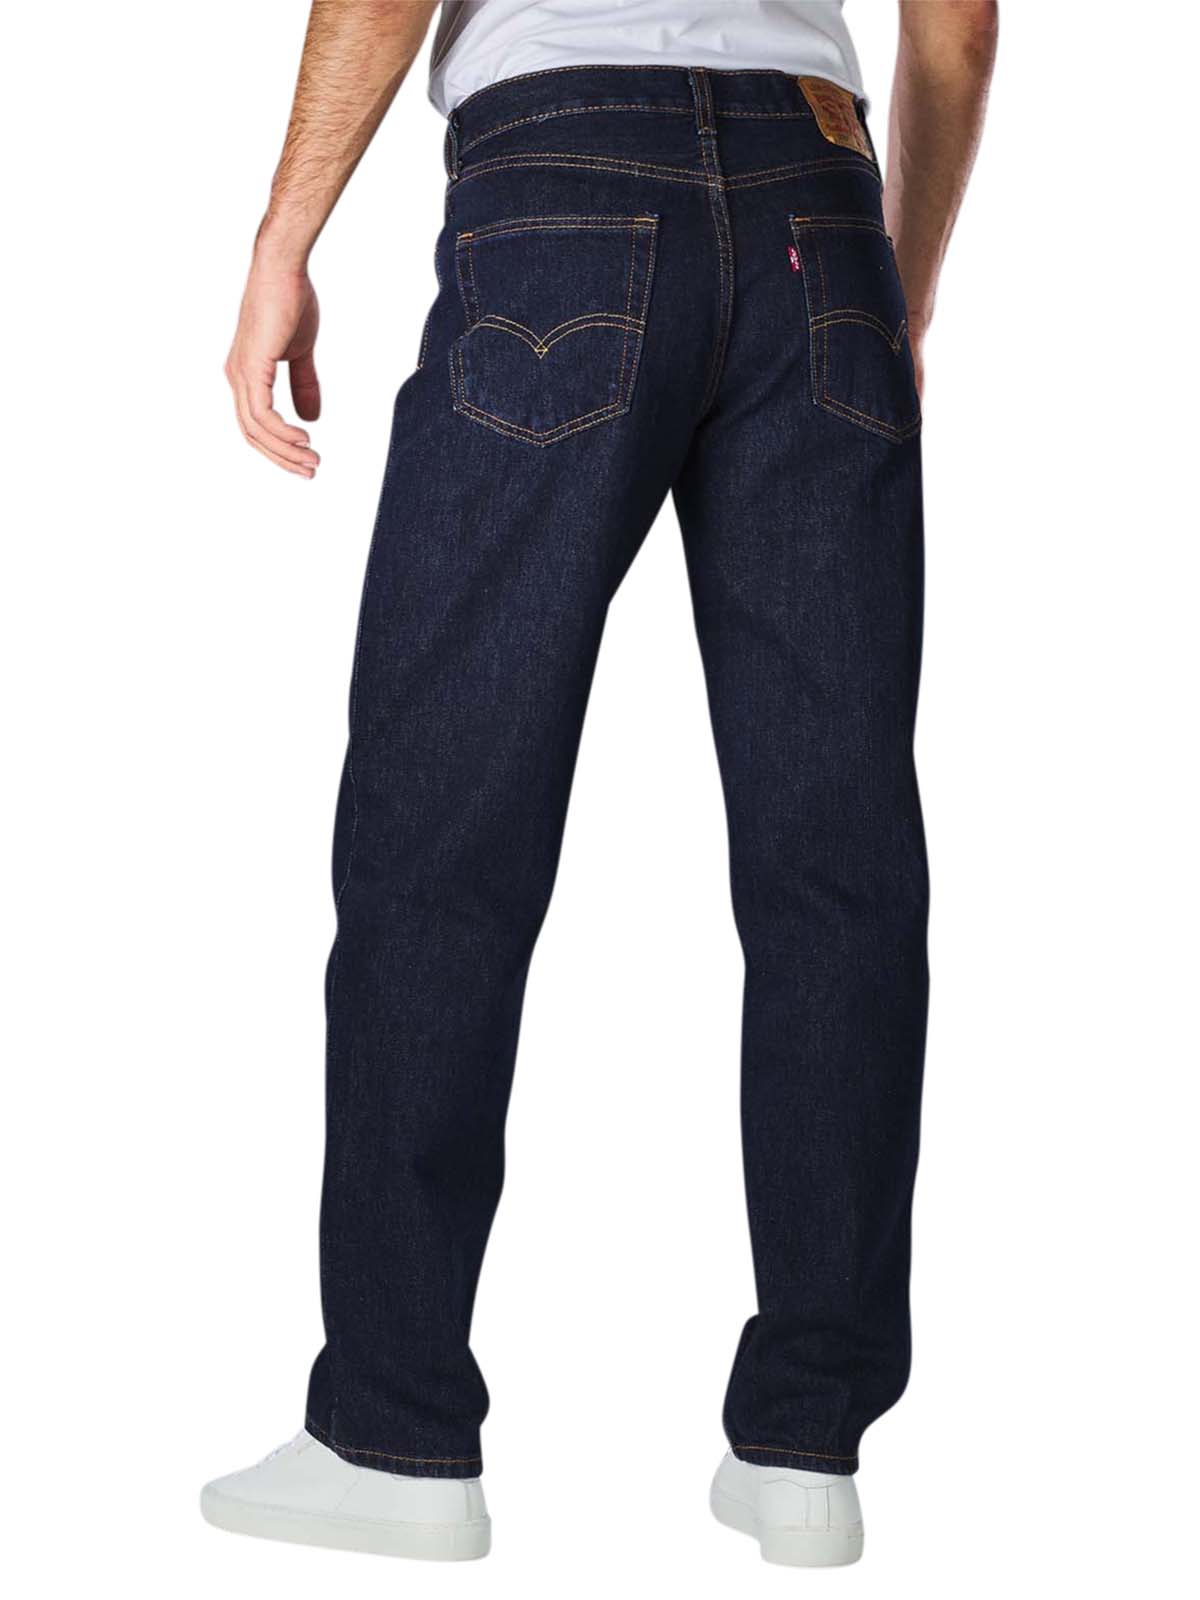 Levi's 550 Jeans Relaxed Fit rinse Levi's Men's Jeans | Free Shipping on   - SIMPLY LOOK GOOD